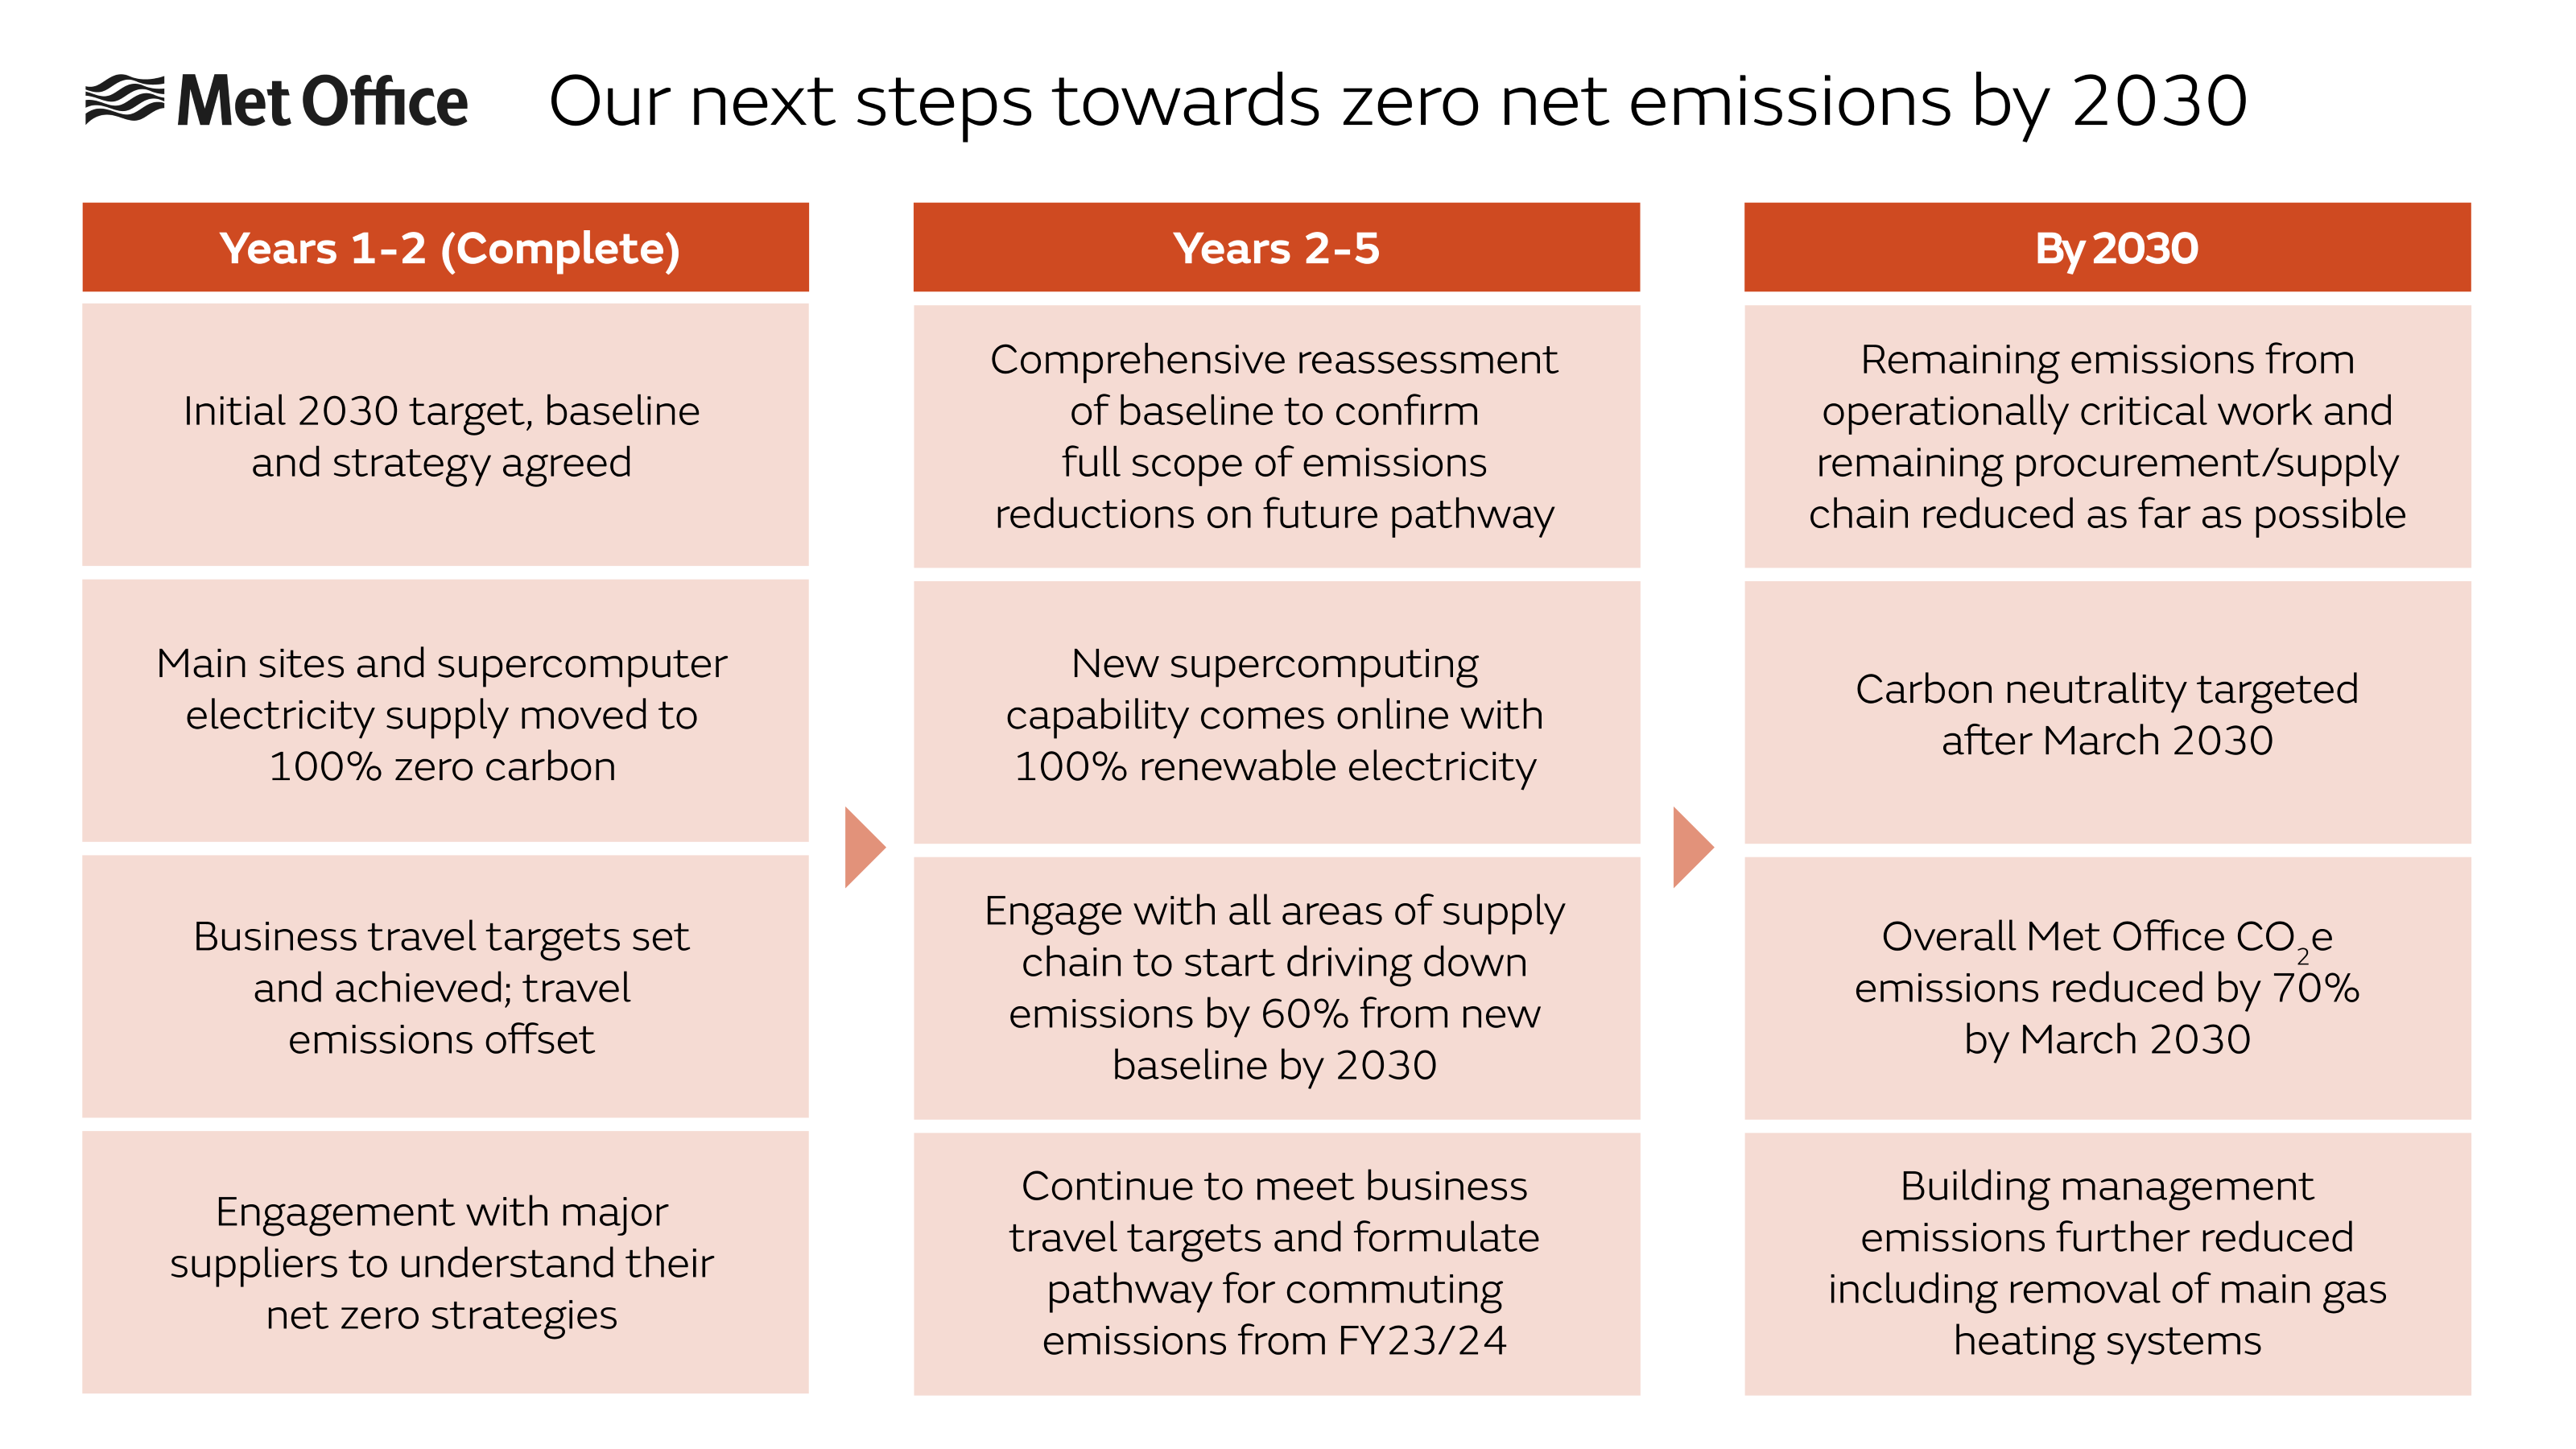 The table shows how the Met Office is aiming for Net Zero in the coming years, looking at reductions in emissions in the areas identified in the page.